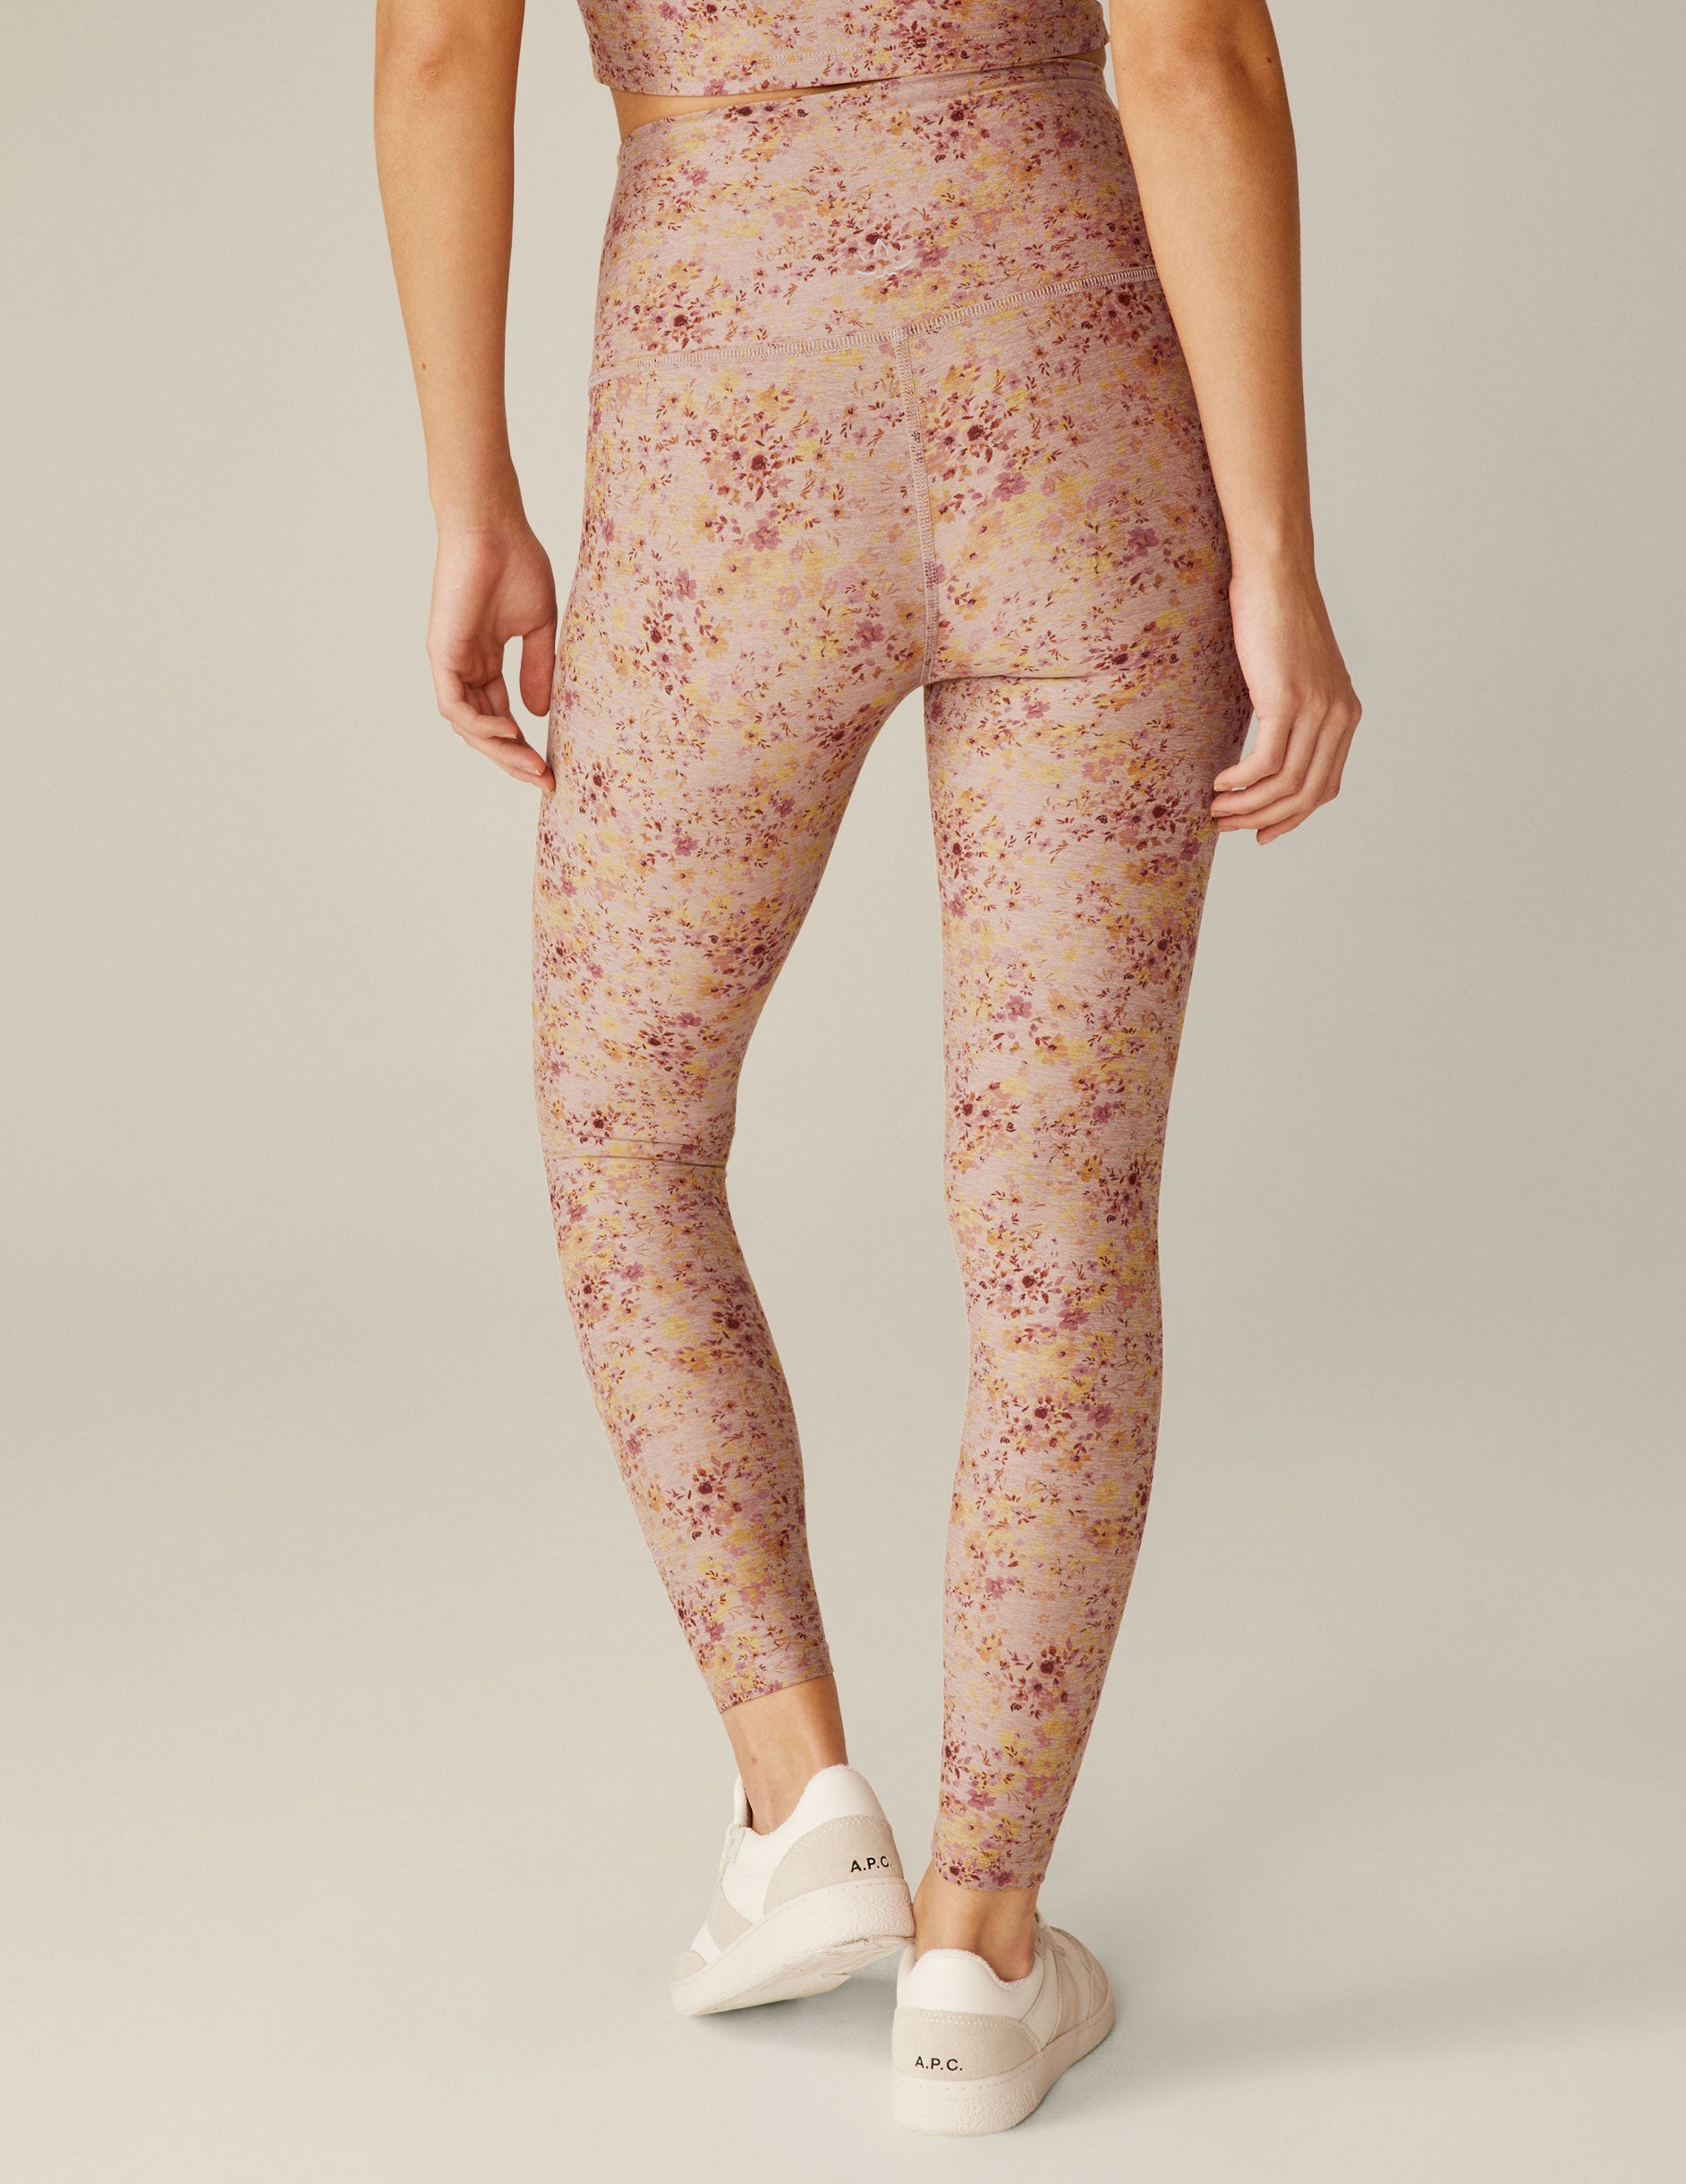 pink high-waisted midi leggings with a floral pattern. 